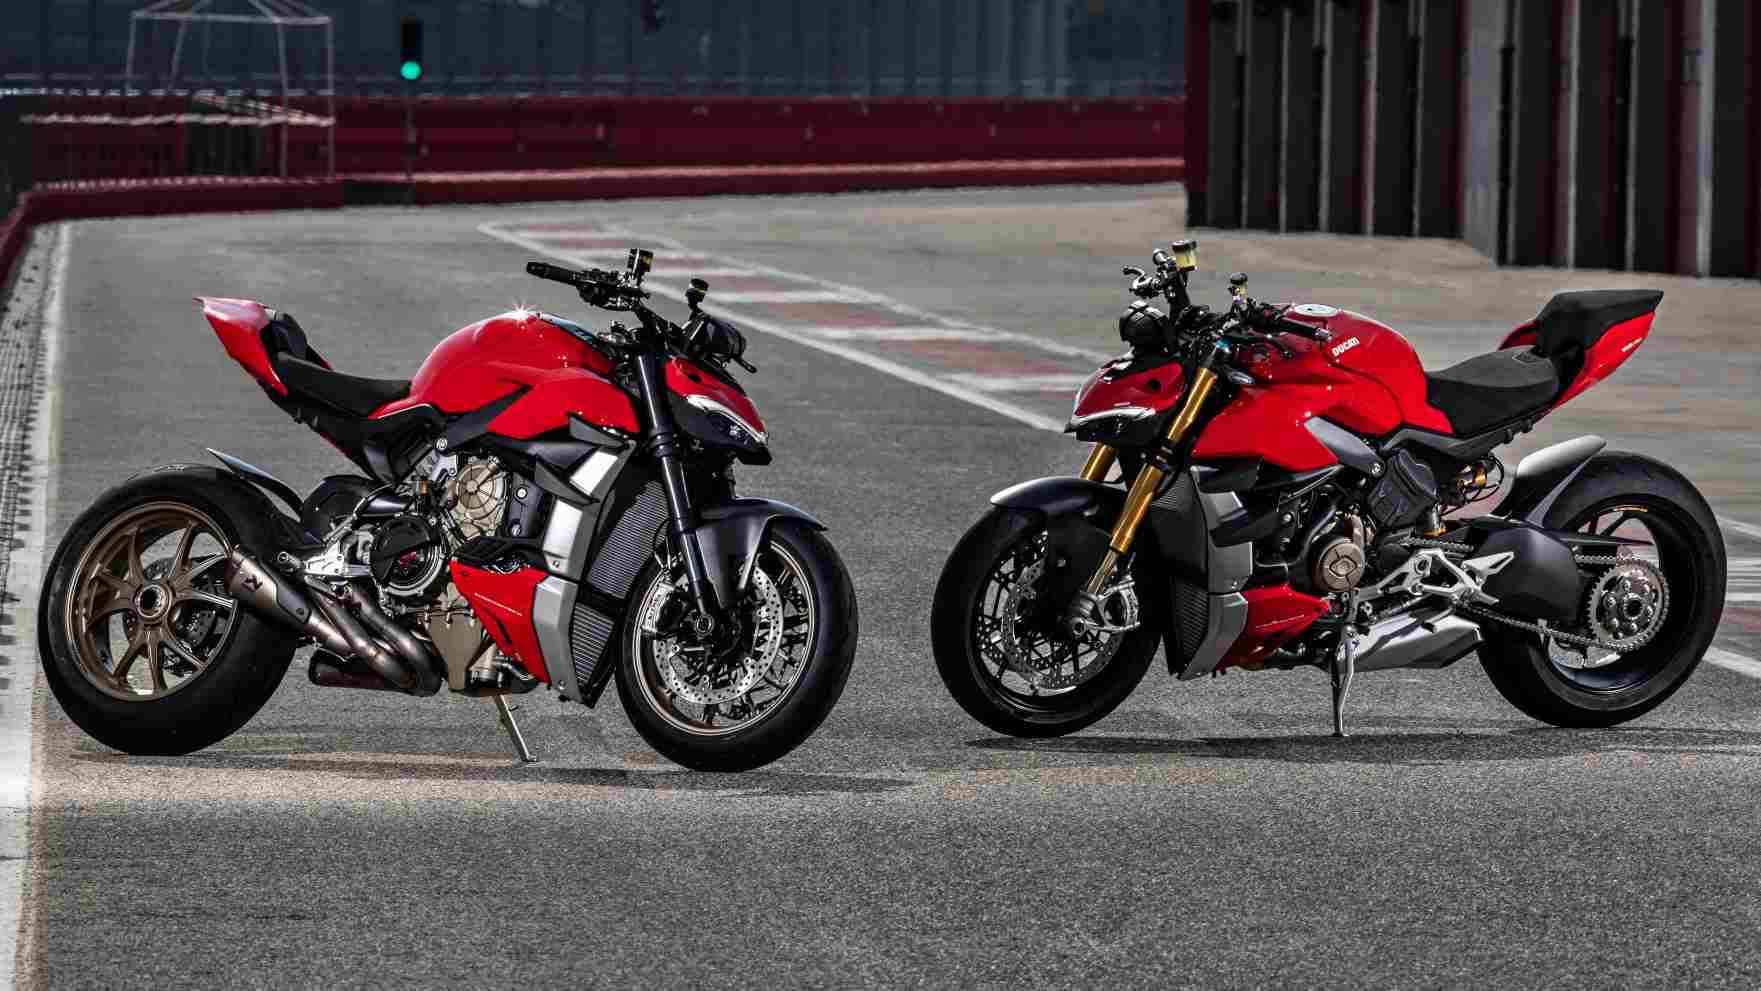 Ducati Streetfighter V4, V4 S launched in India, prices range from Rs 20-23 lakh- Technology News, Gadgetclock